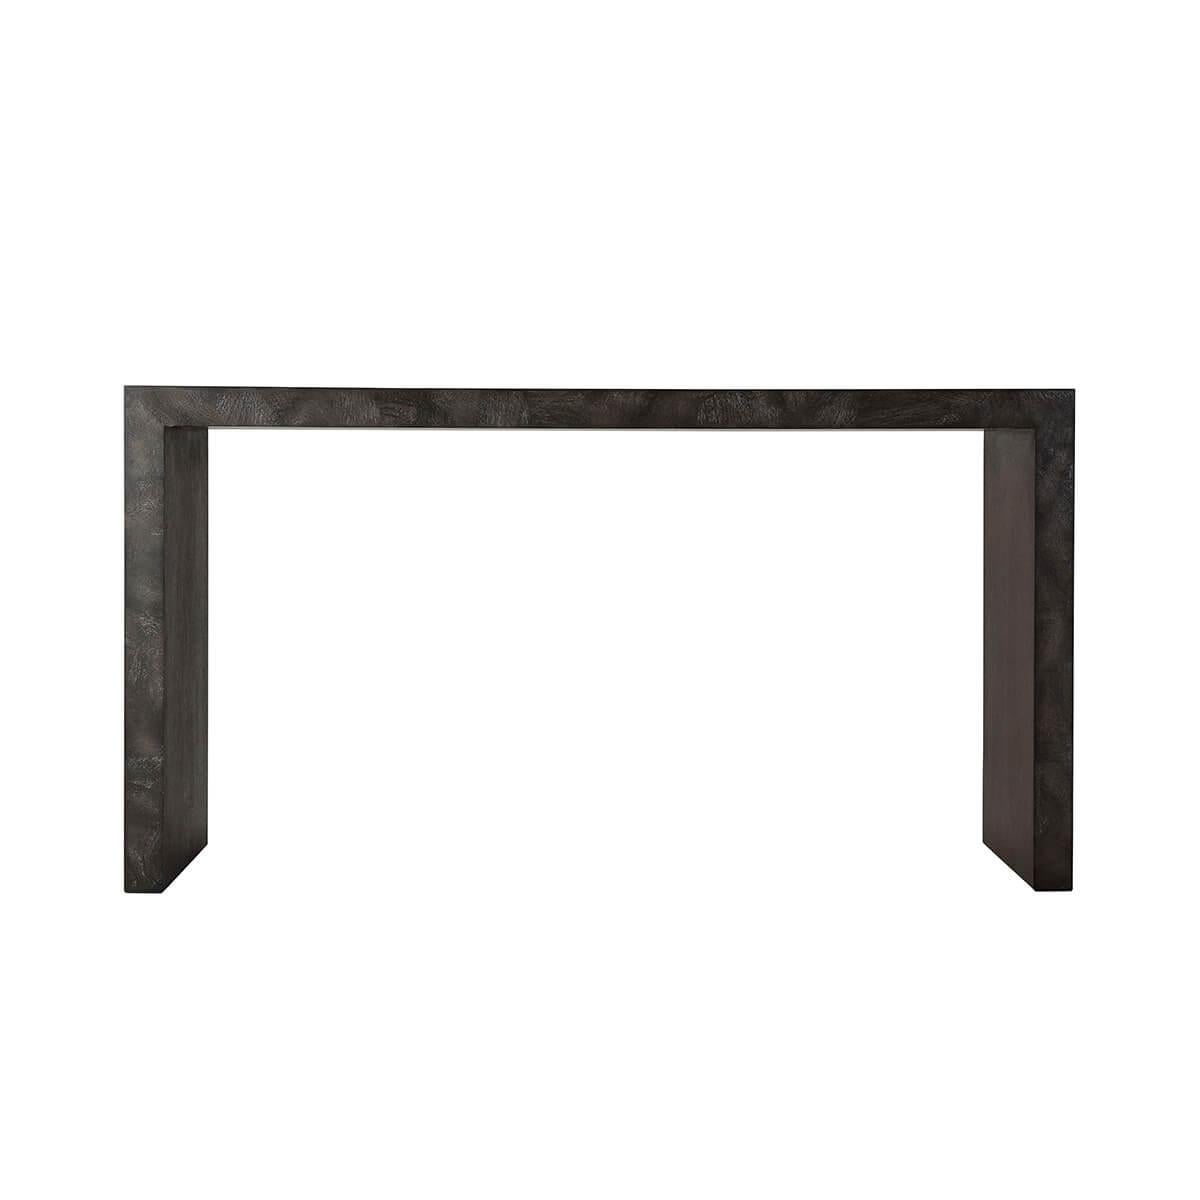 a stylish and functional addition to any living space. This sleek and versatile table is designed to enhance the aesthetic appeal of your home while providing practical display options.

Crafted with meticulous attention to detail, the console table